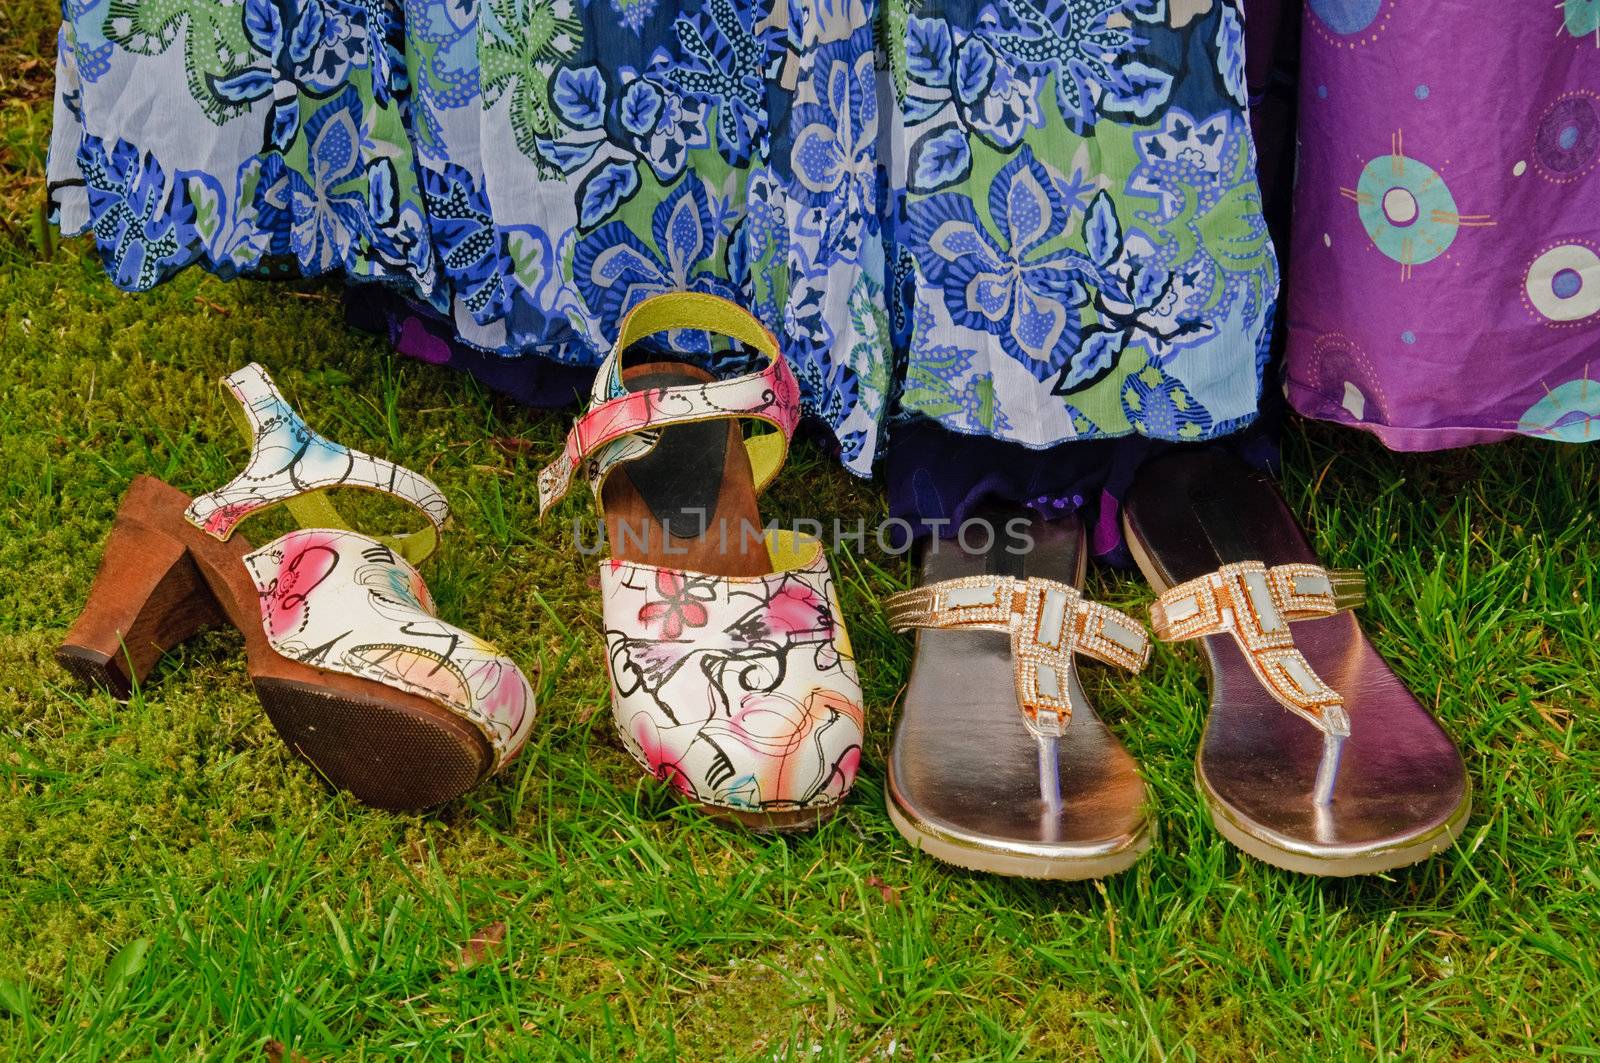 Summer dresses hanging in the garden with two pairs of shoes in front